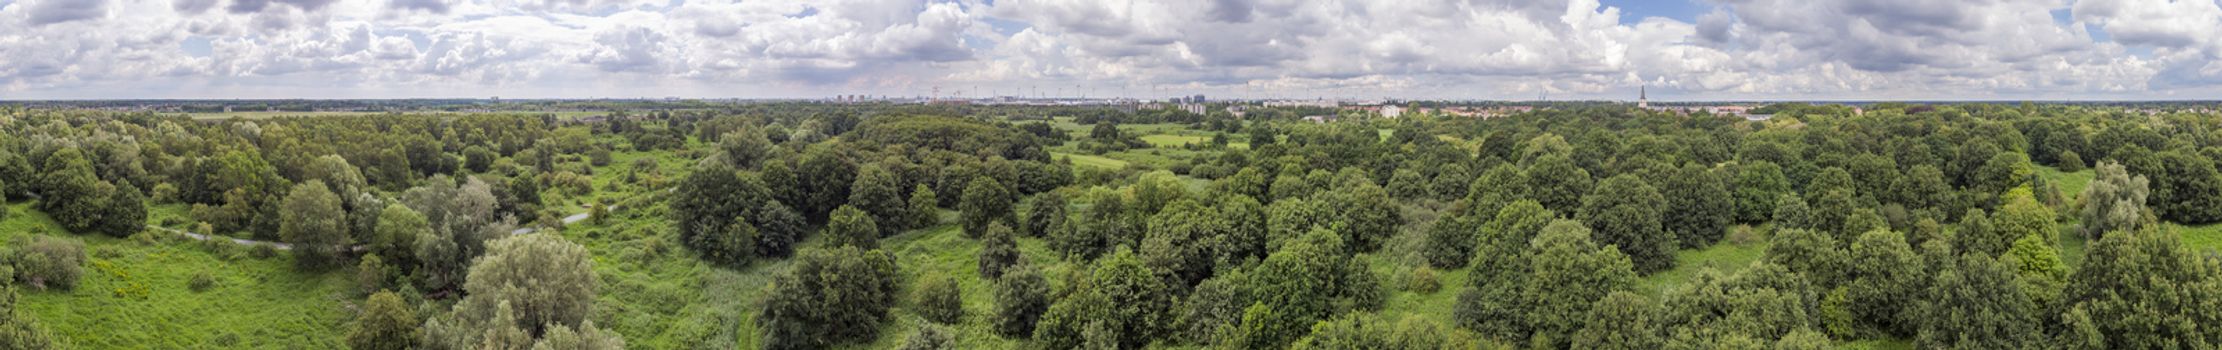 360 aerial panorama over Oude Landen nature park in Ekeren, with village and harbor in the distance. Travel and tourism